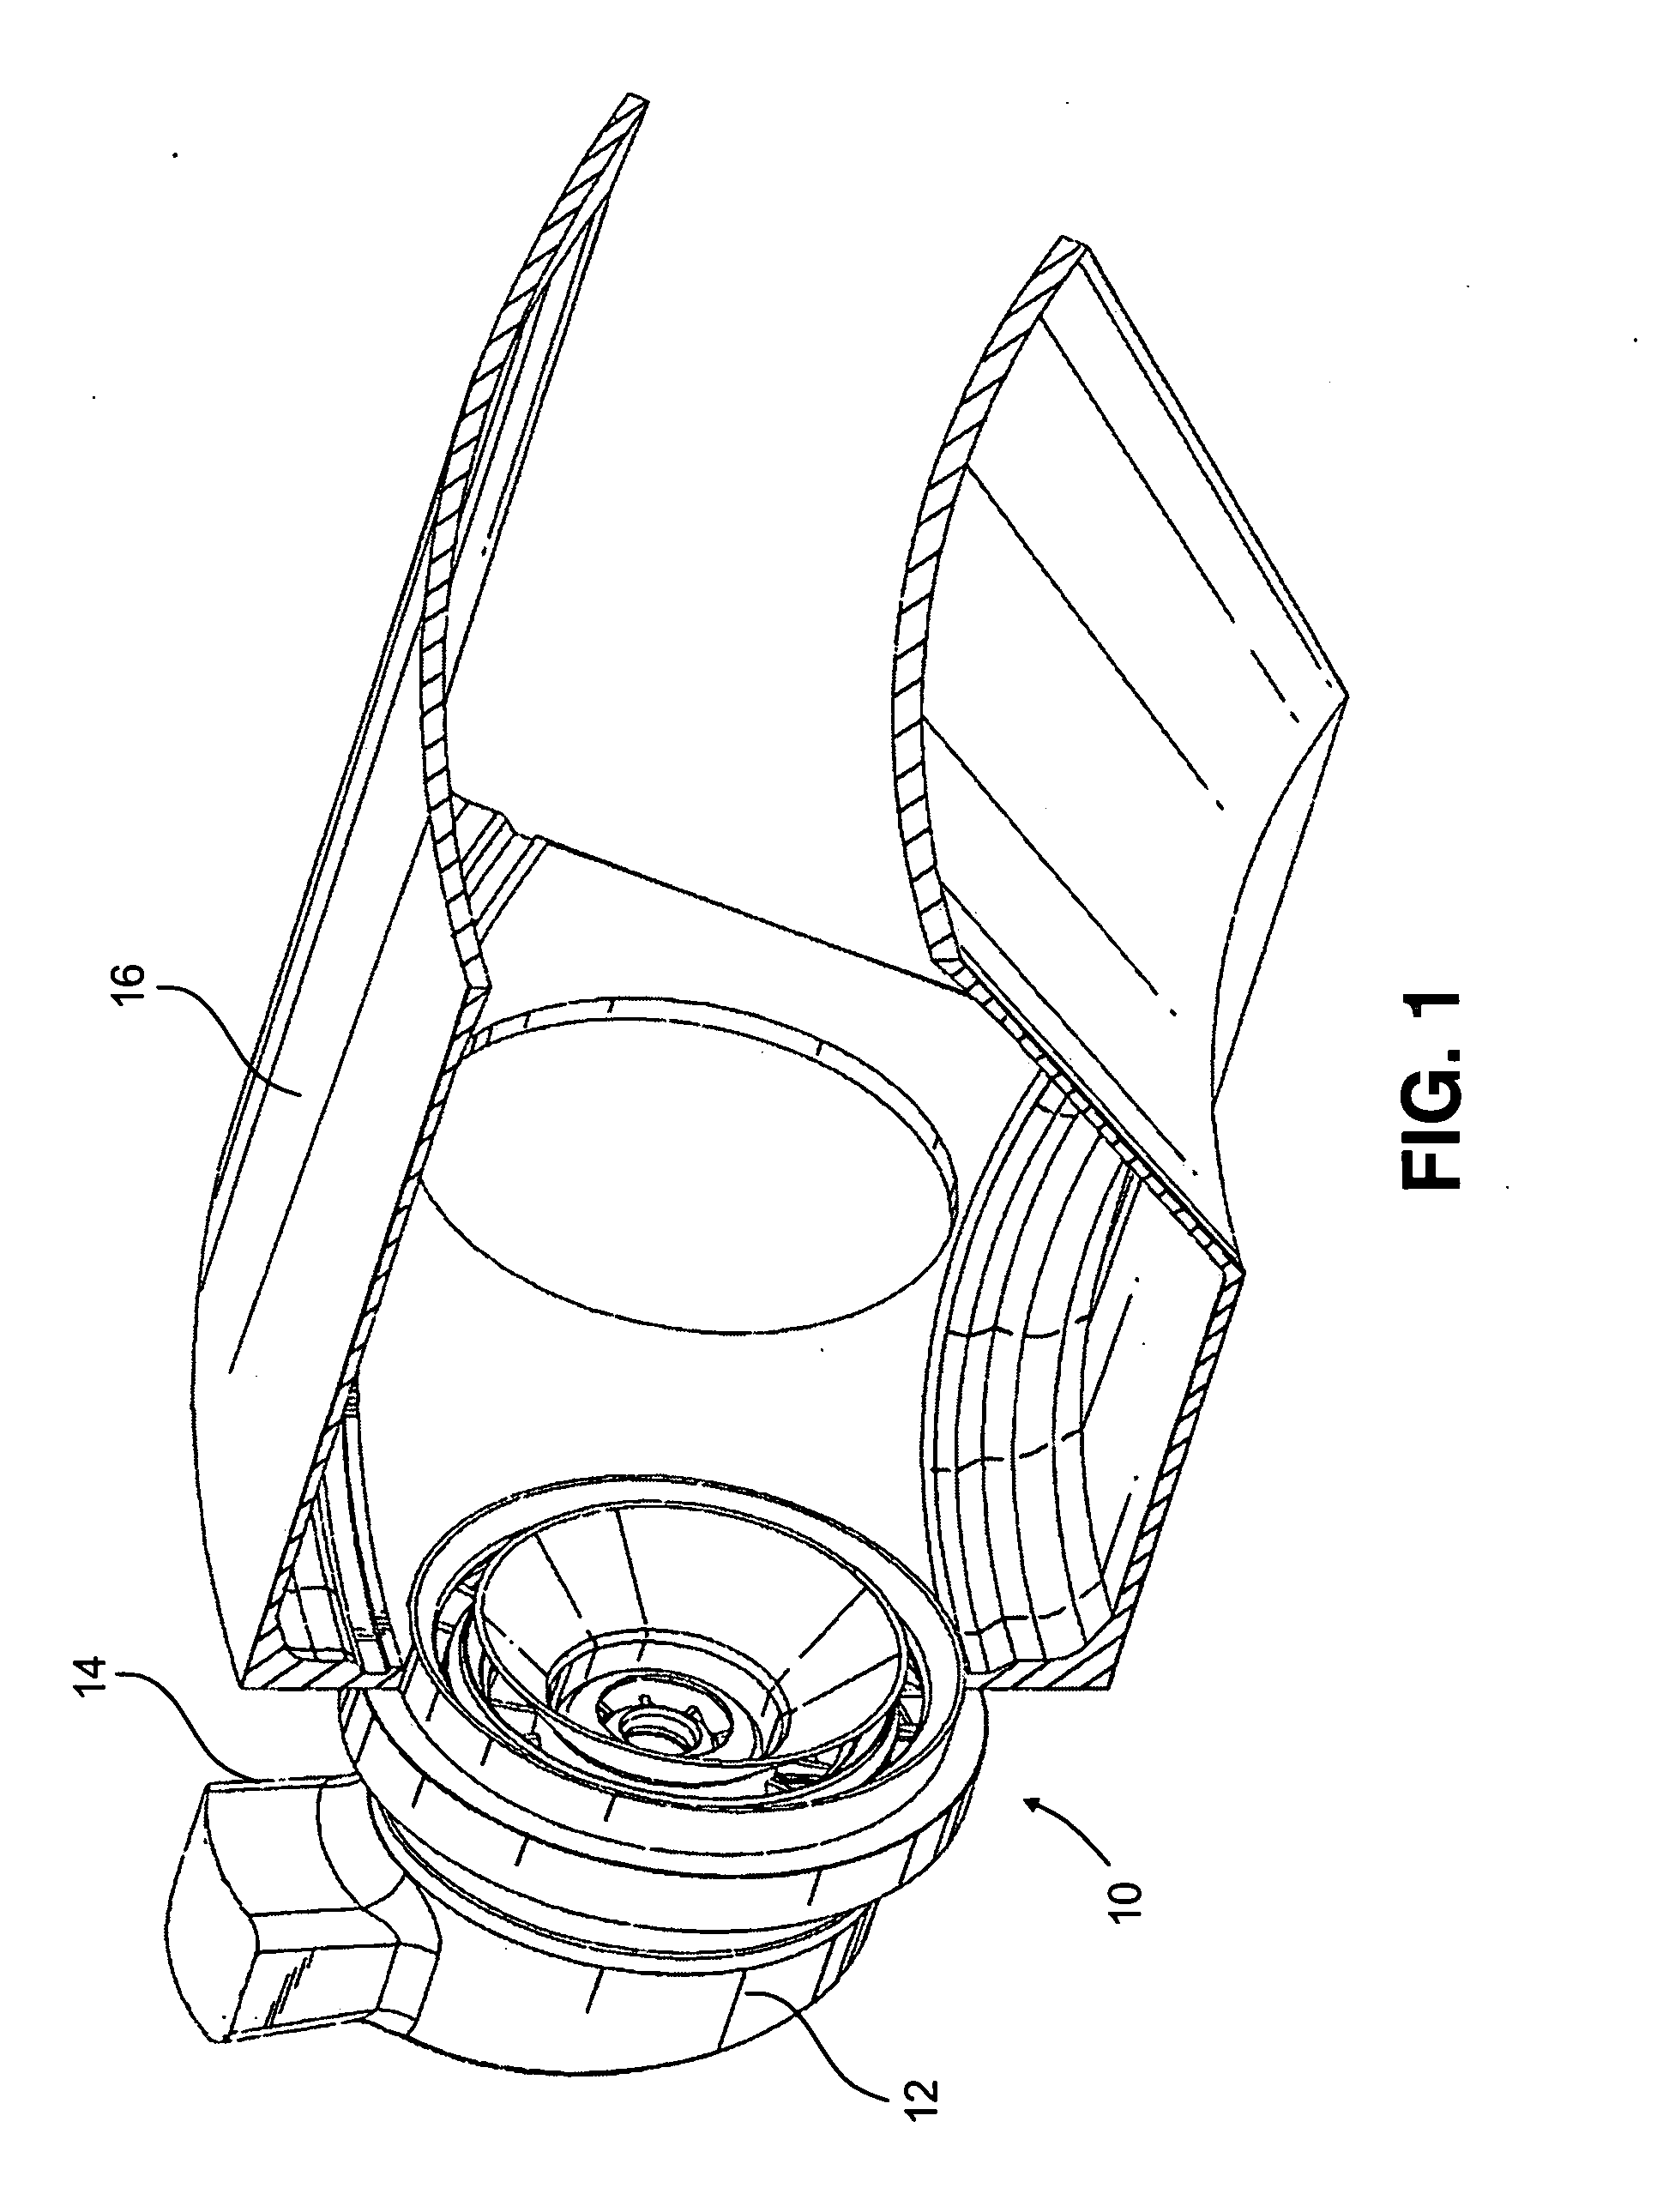 Lean direct injection atomizer for gas turbine engines